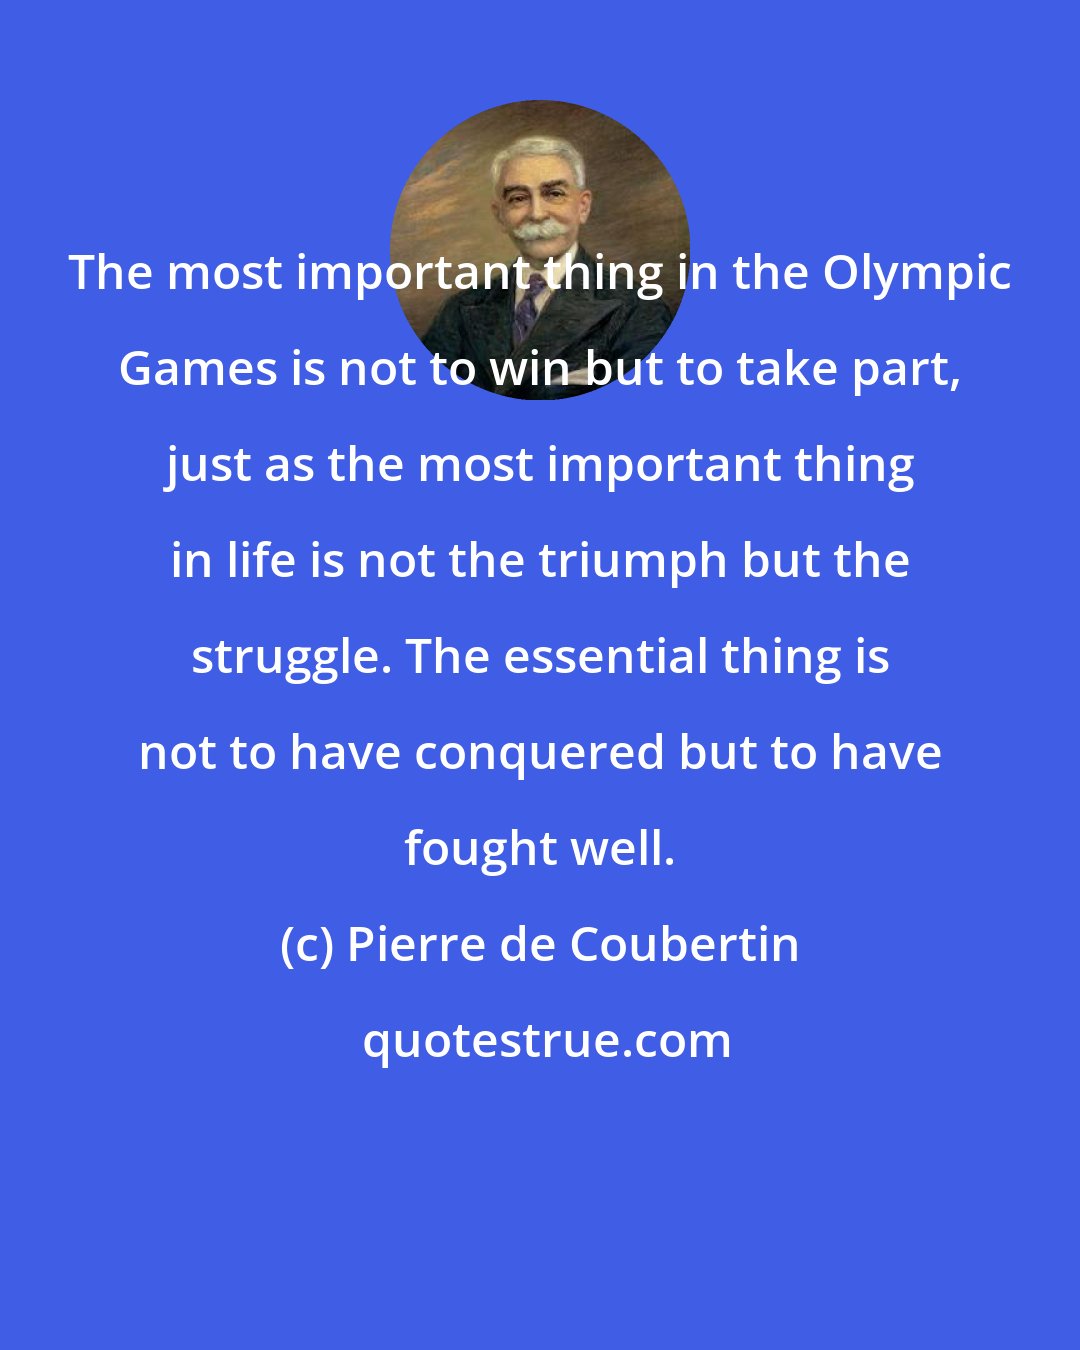 Pierre de Coubertin: The most important thing in the Olympic Games is not to win but to take part, just as the most important thing in life is not the triumph but the struggle. The essential thing is not to have conquered but to have fought well.